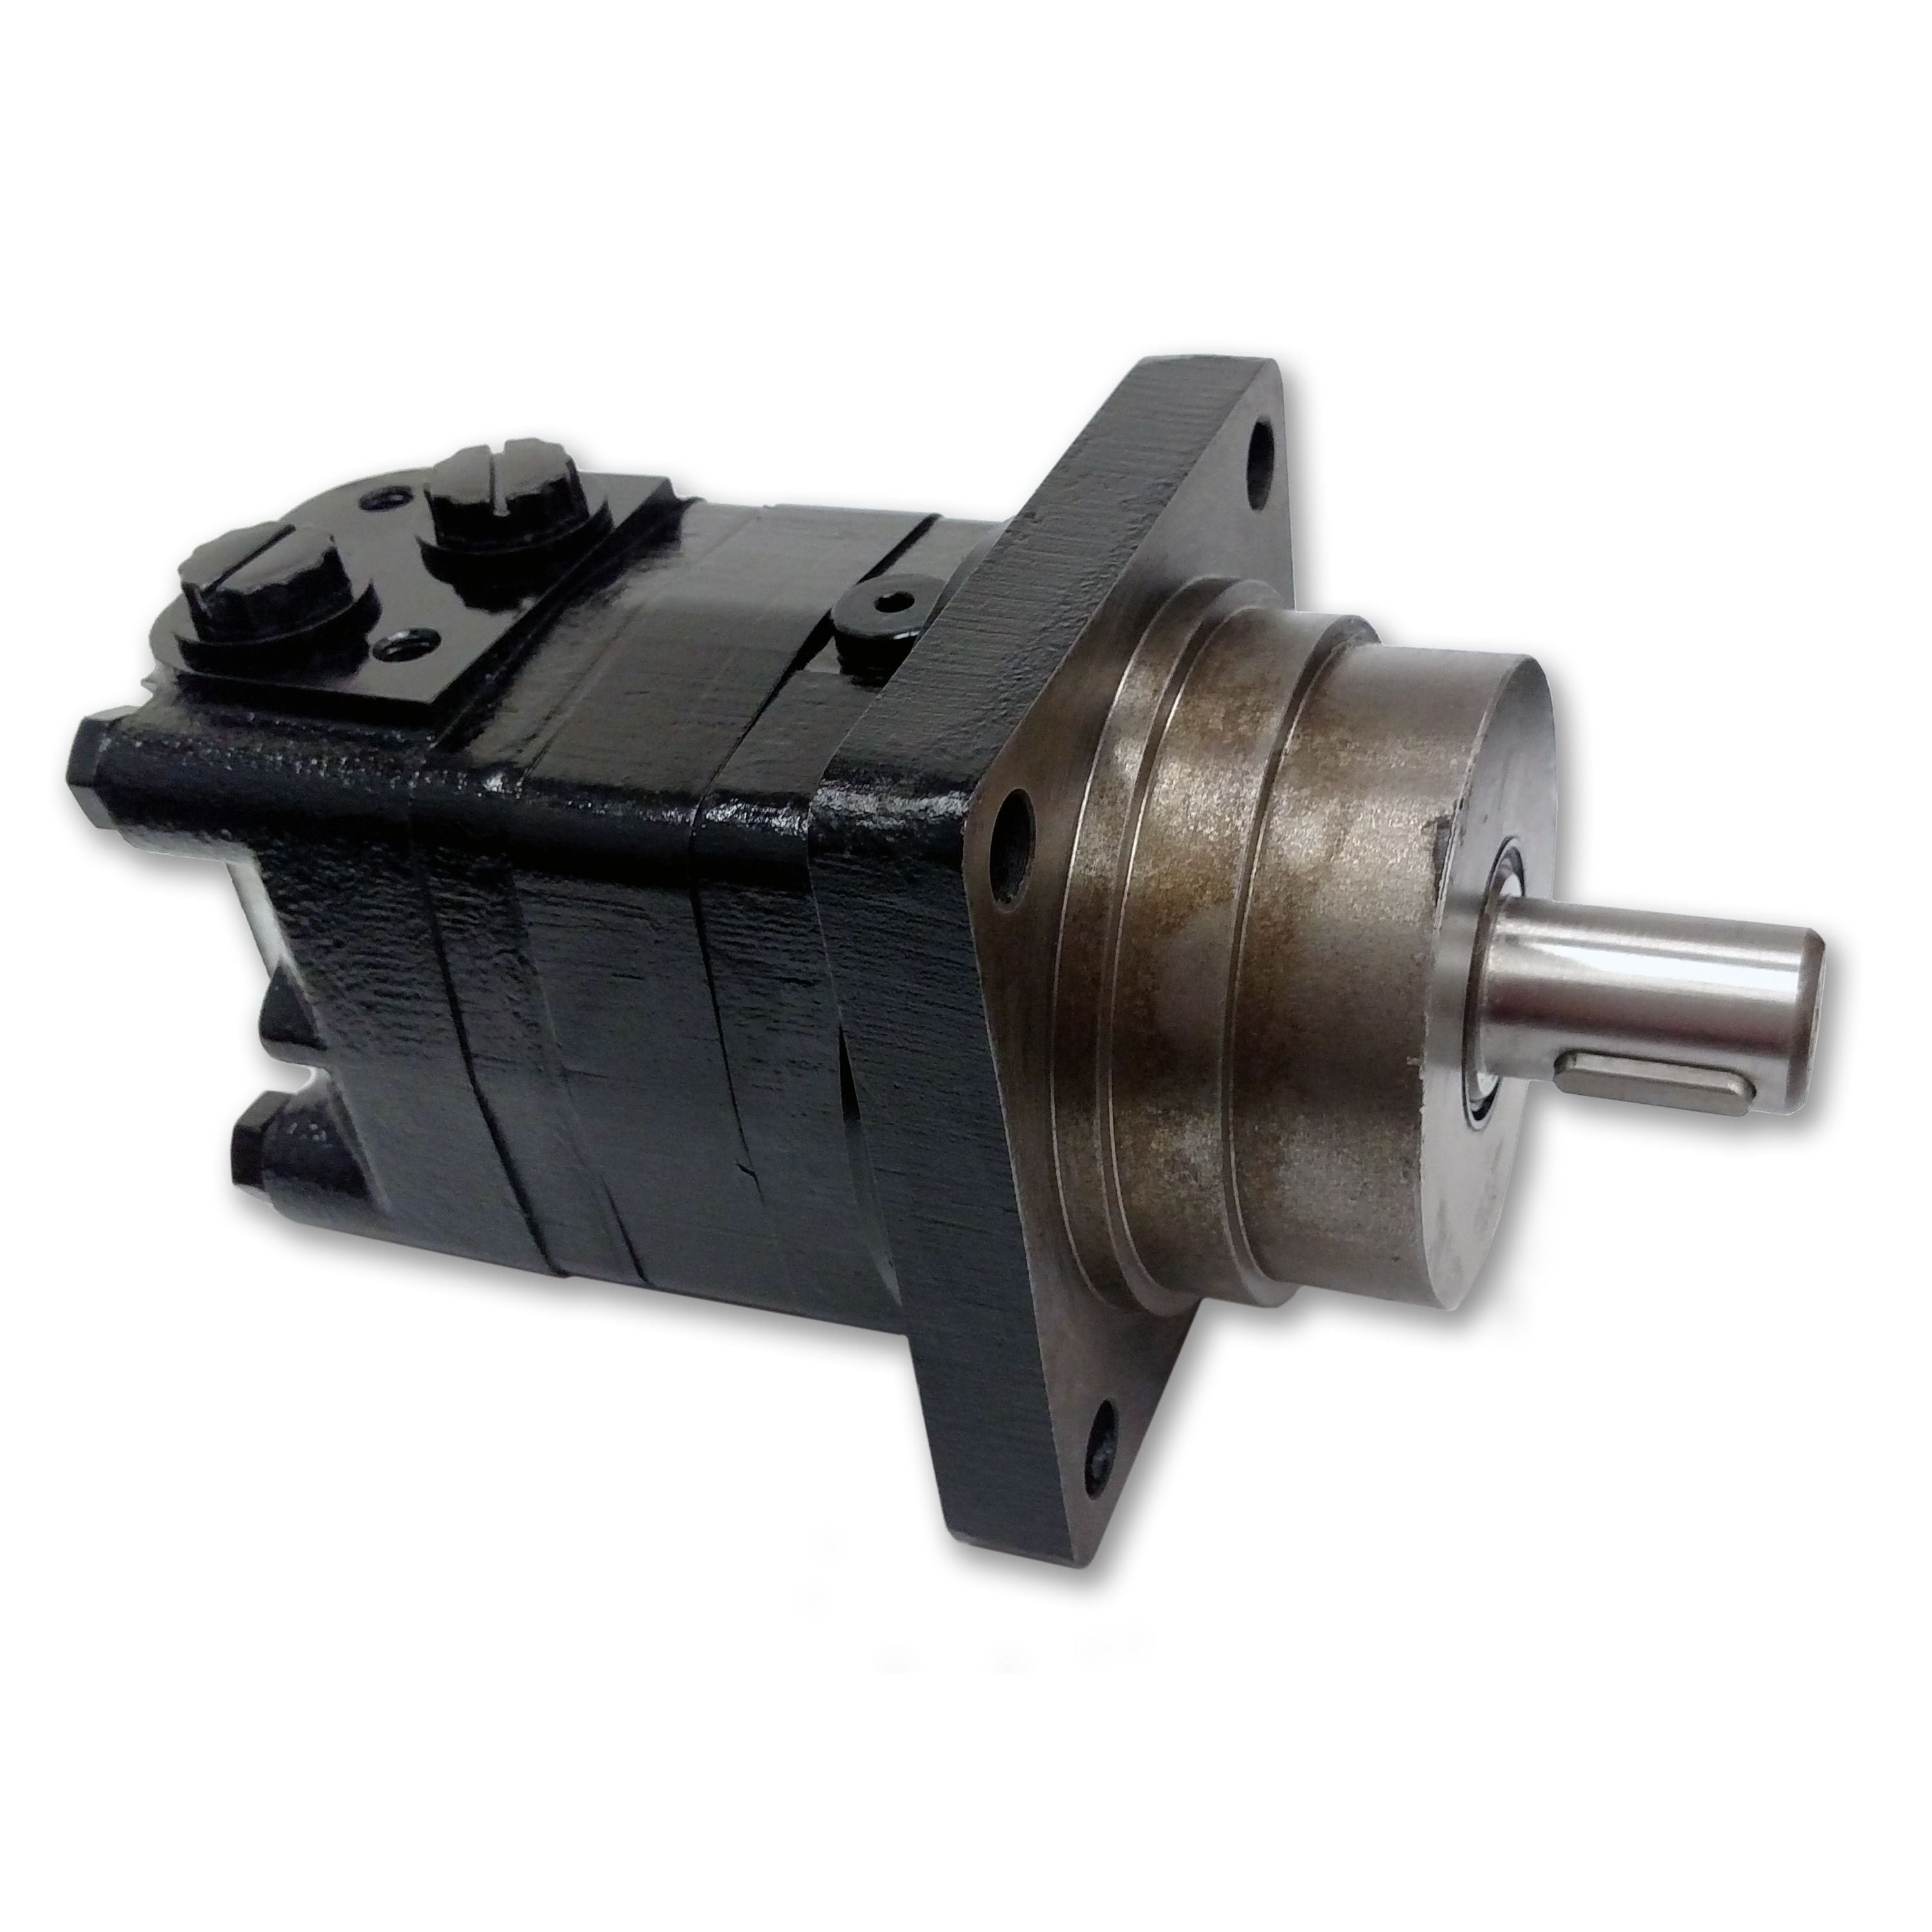 BMSY-315-WE-F-S : Dynamic LSHT Motor, 311cc, 240RPM, 7787in-lb, 2900psi Differential, 19.81GPM, Wheel Mount, 14-Tooth, 12/24 Pitch Shaft, Side Ported, #10 SAE (5/8")